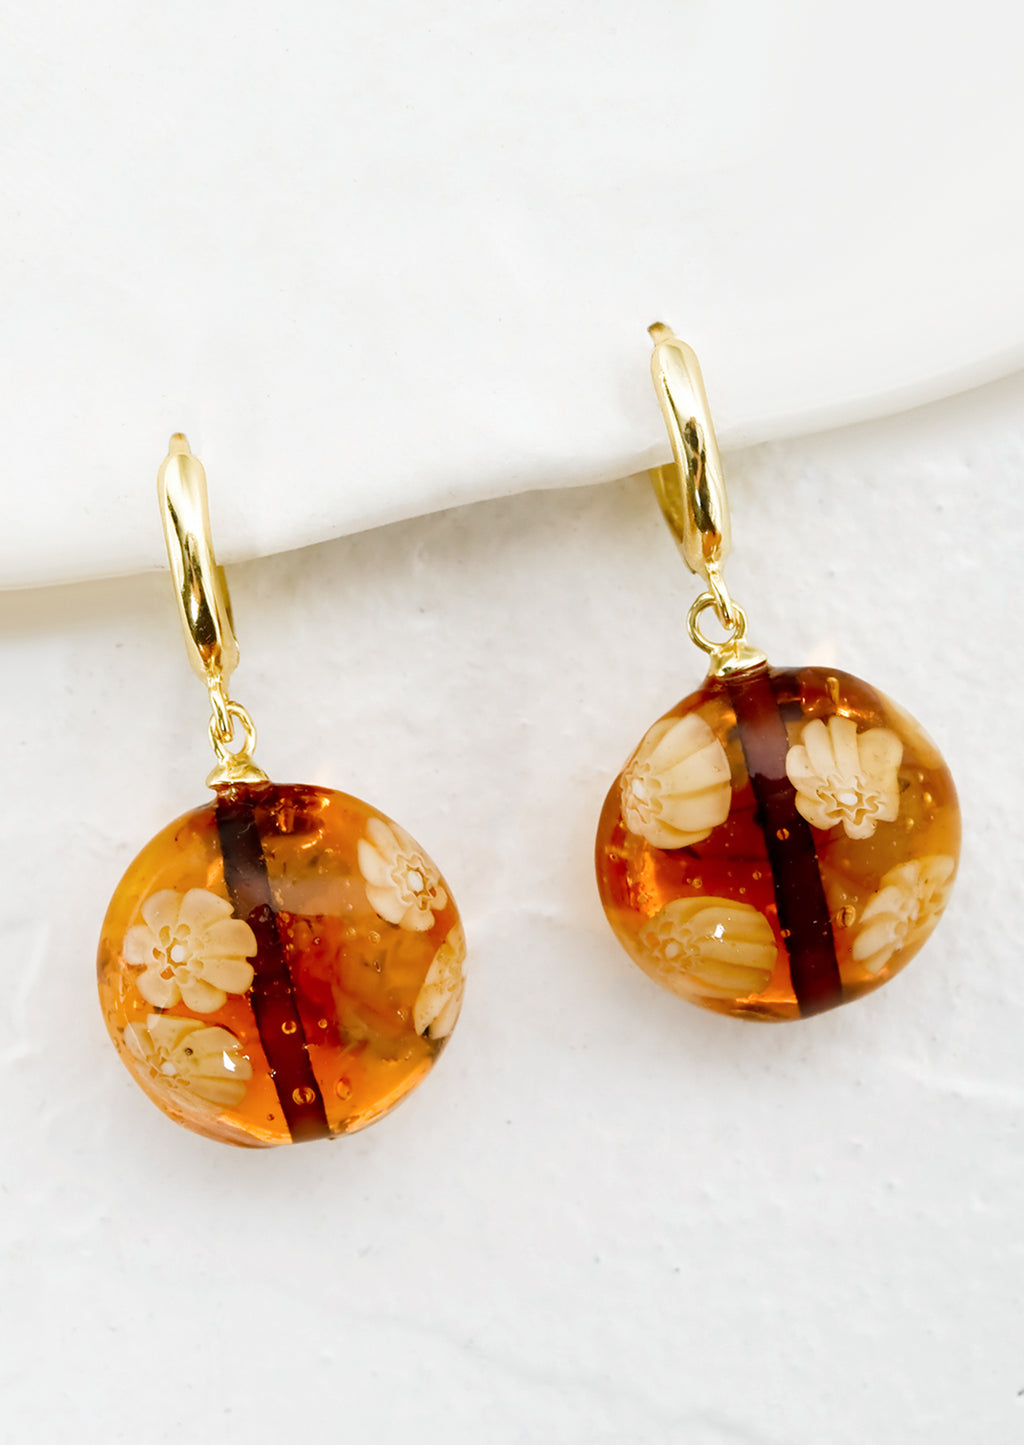 Sepia: A pair of gold huggie hoops with sepia murano glass beads.